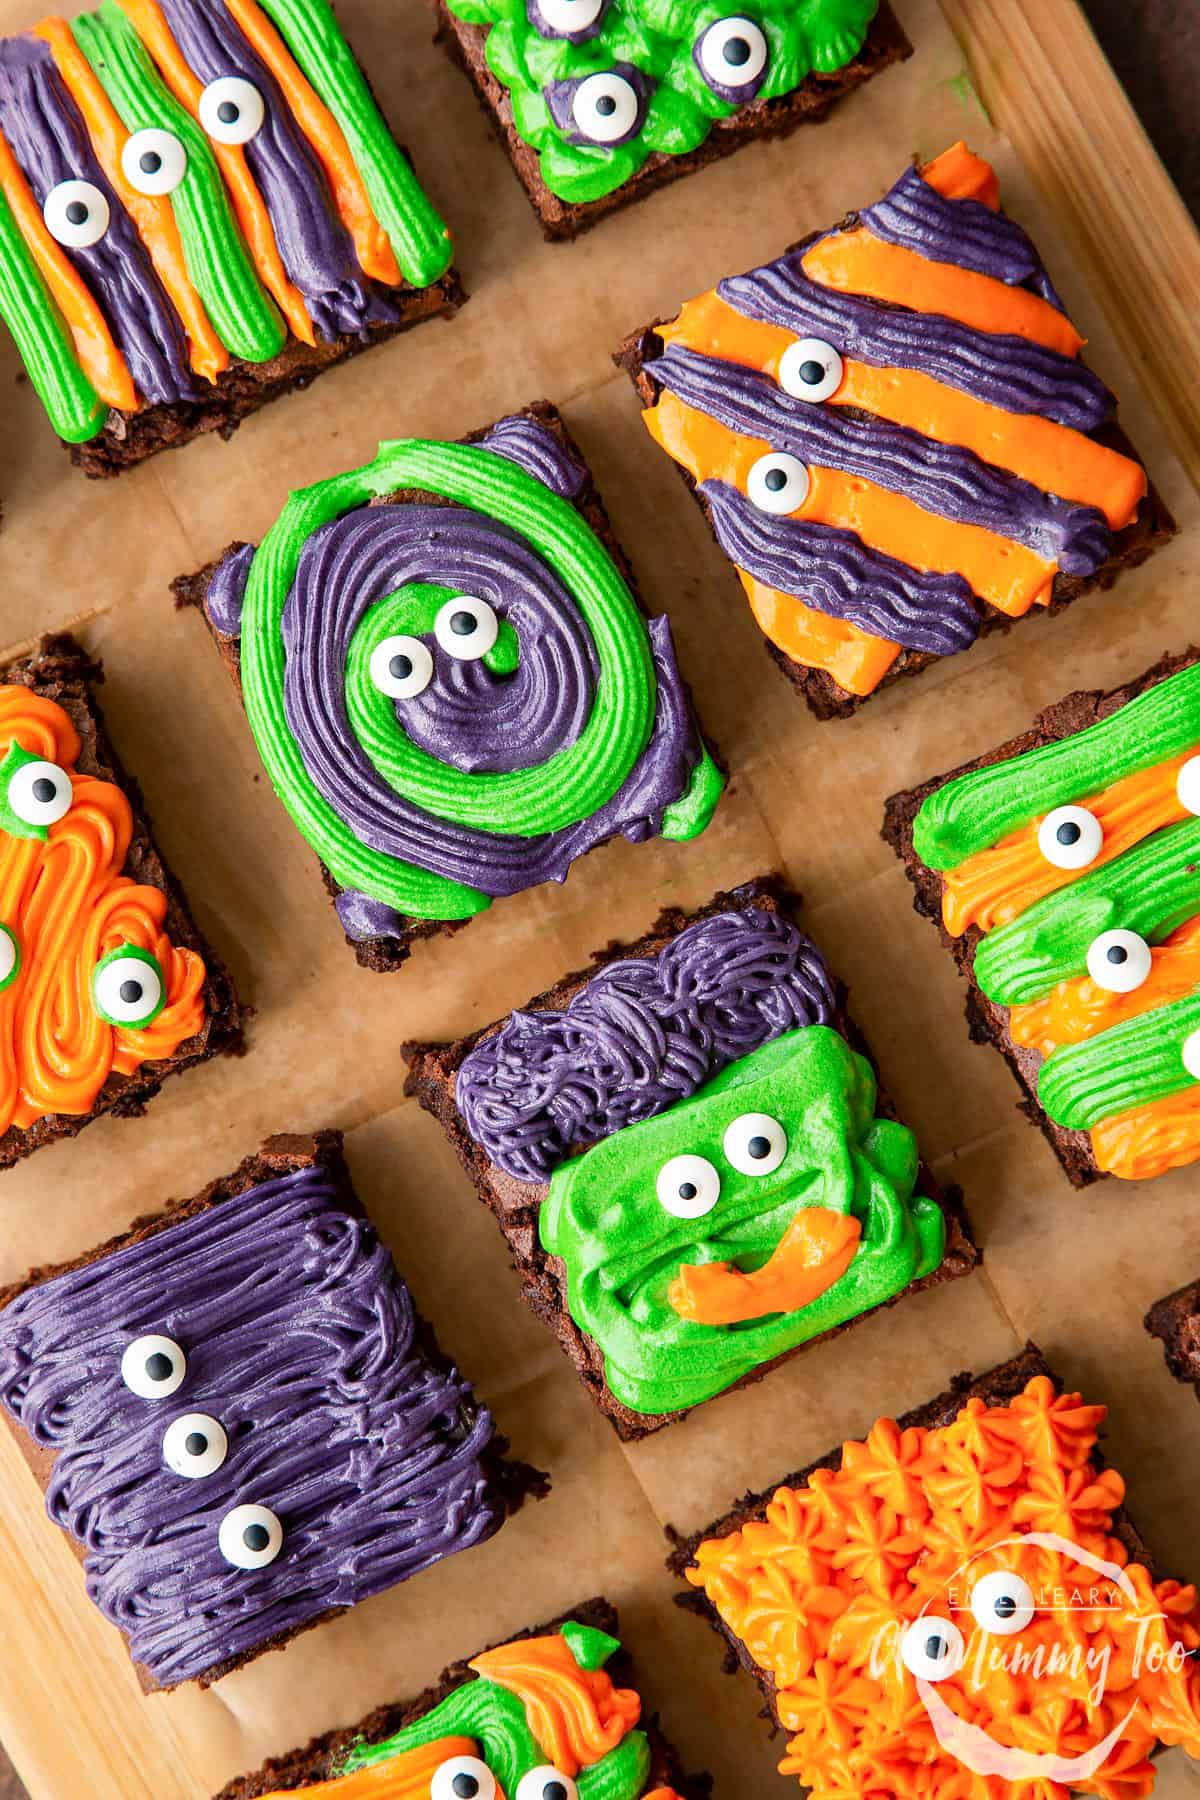 monsters made of colorful frosting on brownies